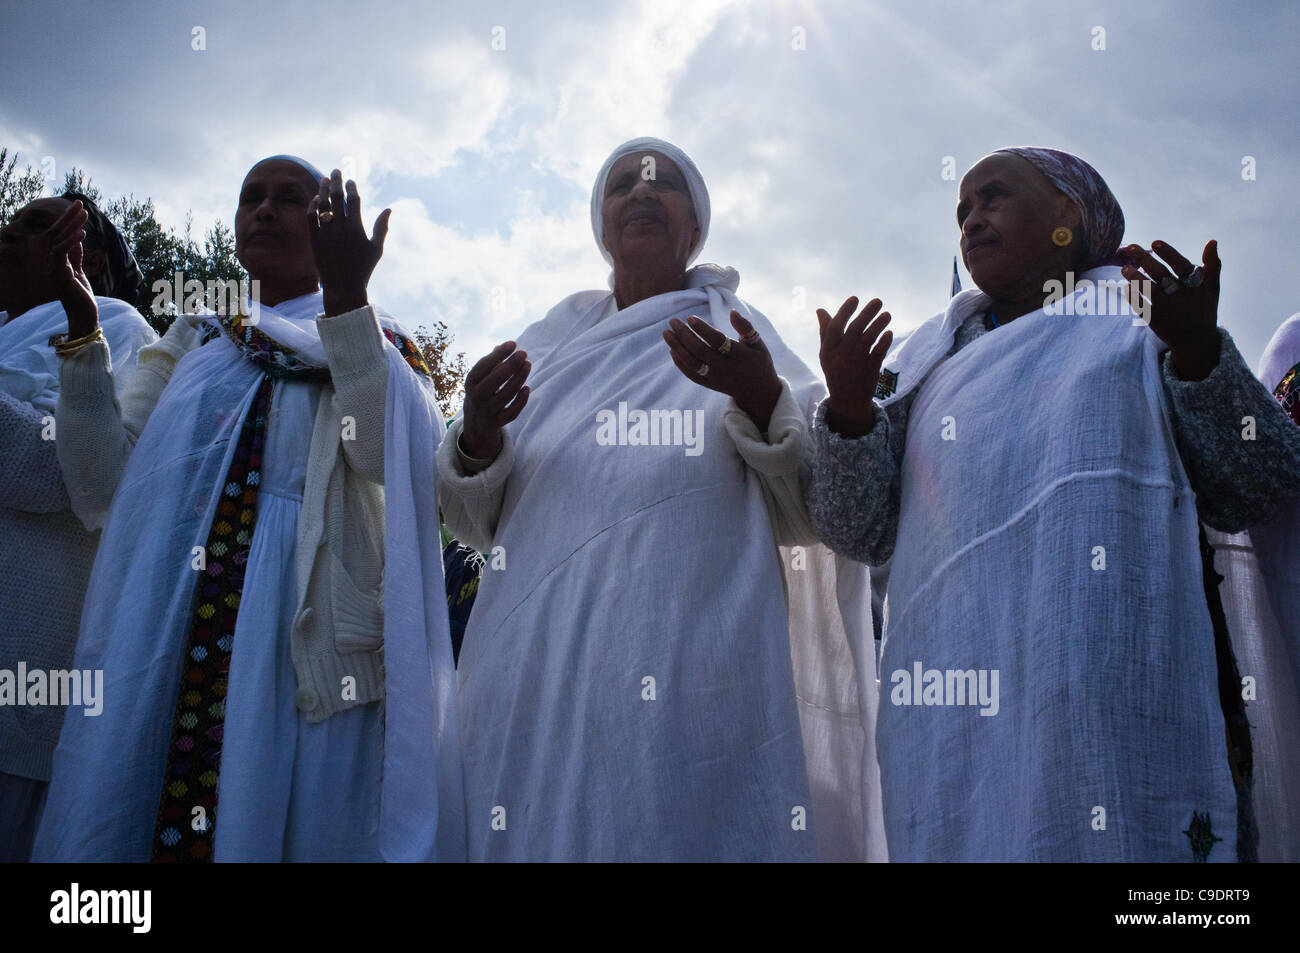 Ethiopian women take part in prayer as the Jewish Ethiopian community in Israel celebrates the Sigd Holiday, symbolizing their yearning for Jerusalem, at the Sherover Promenade overlooking the Temple Mount. Jerusalem, Israel. 24th November 2011. Stock Photo